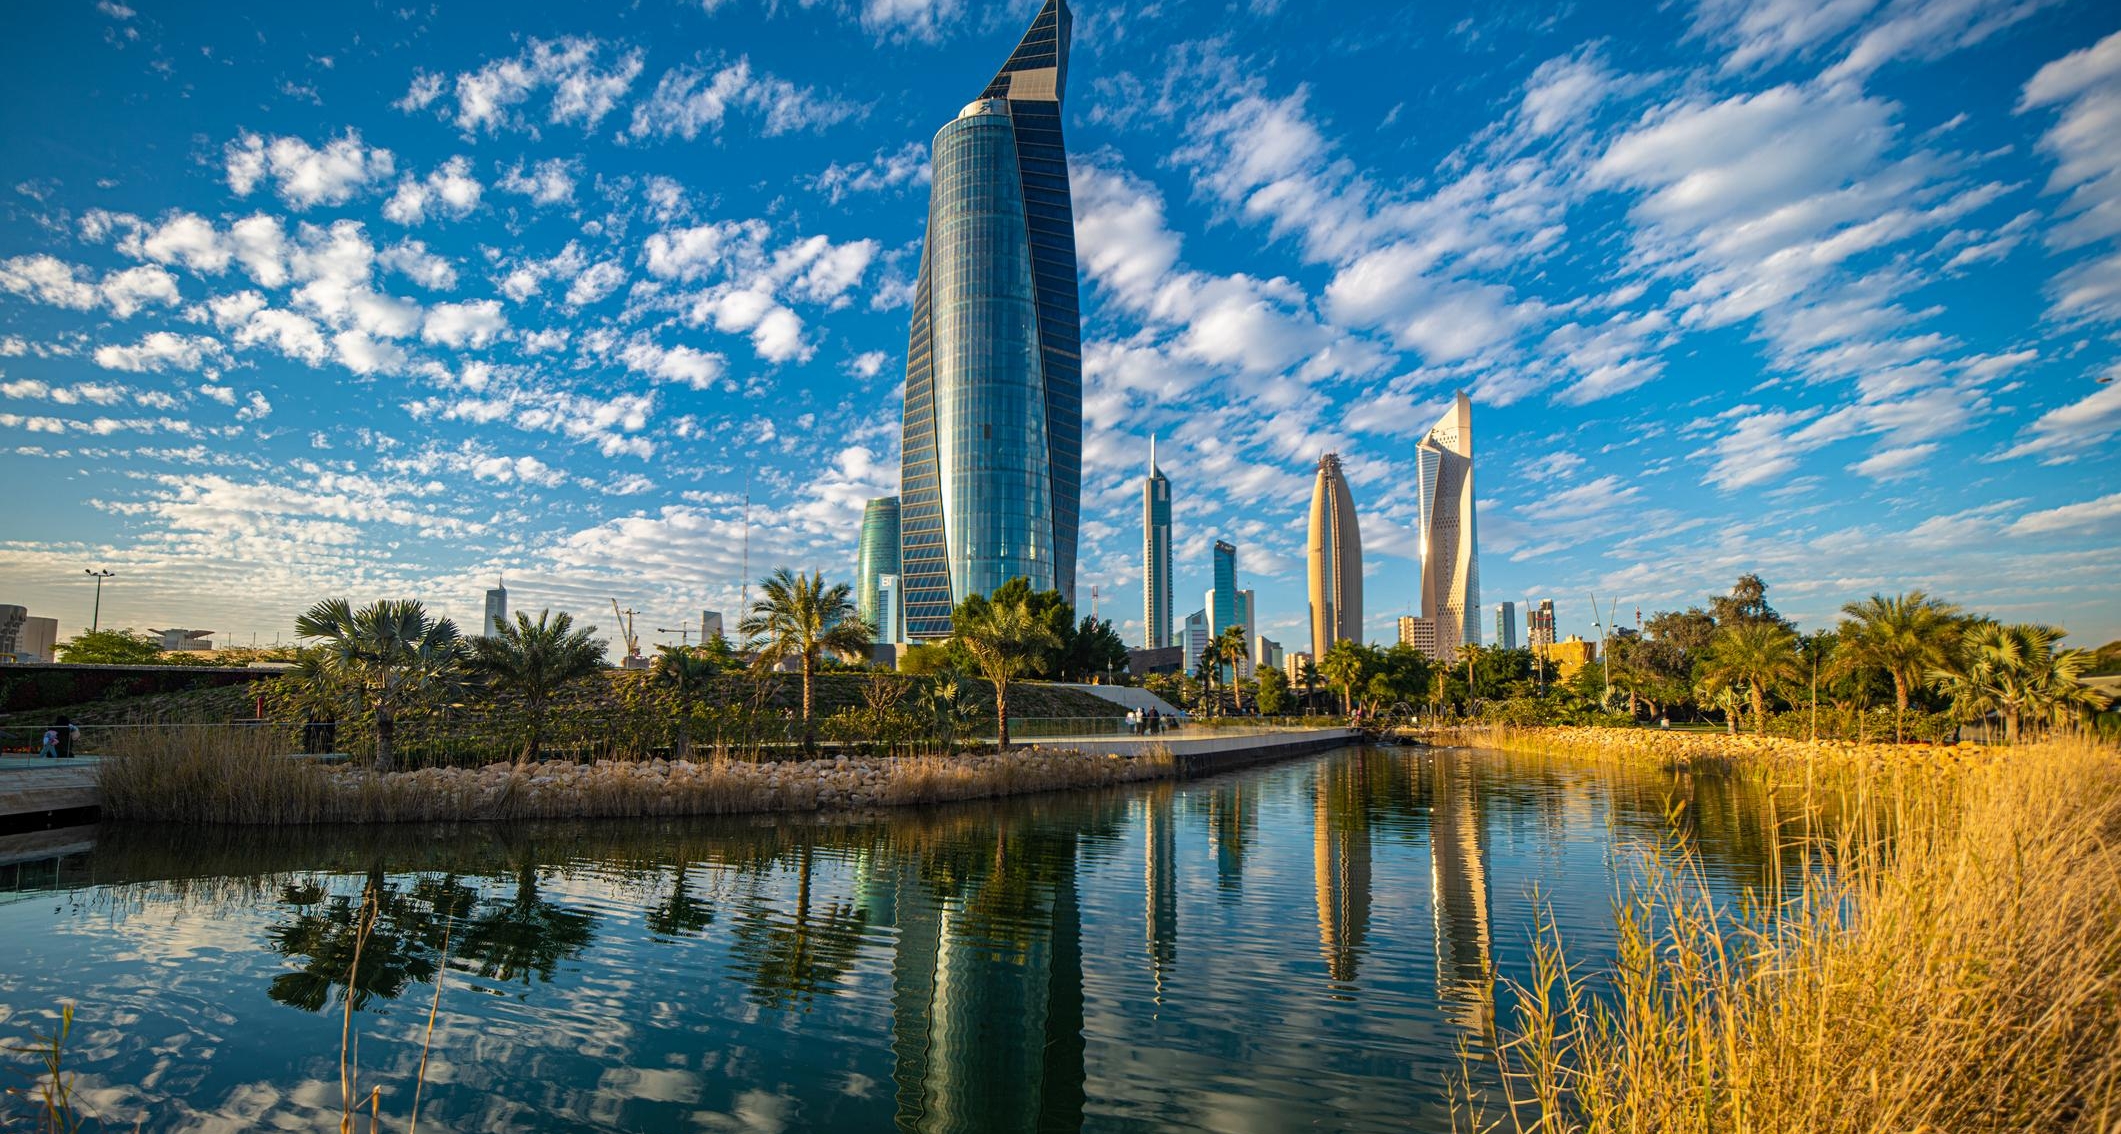 Kuwait may allow foreigners 100% ownership of businesses, official tells Al-Arabiya